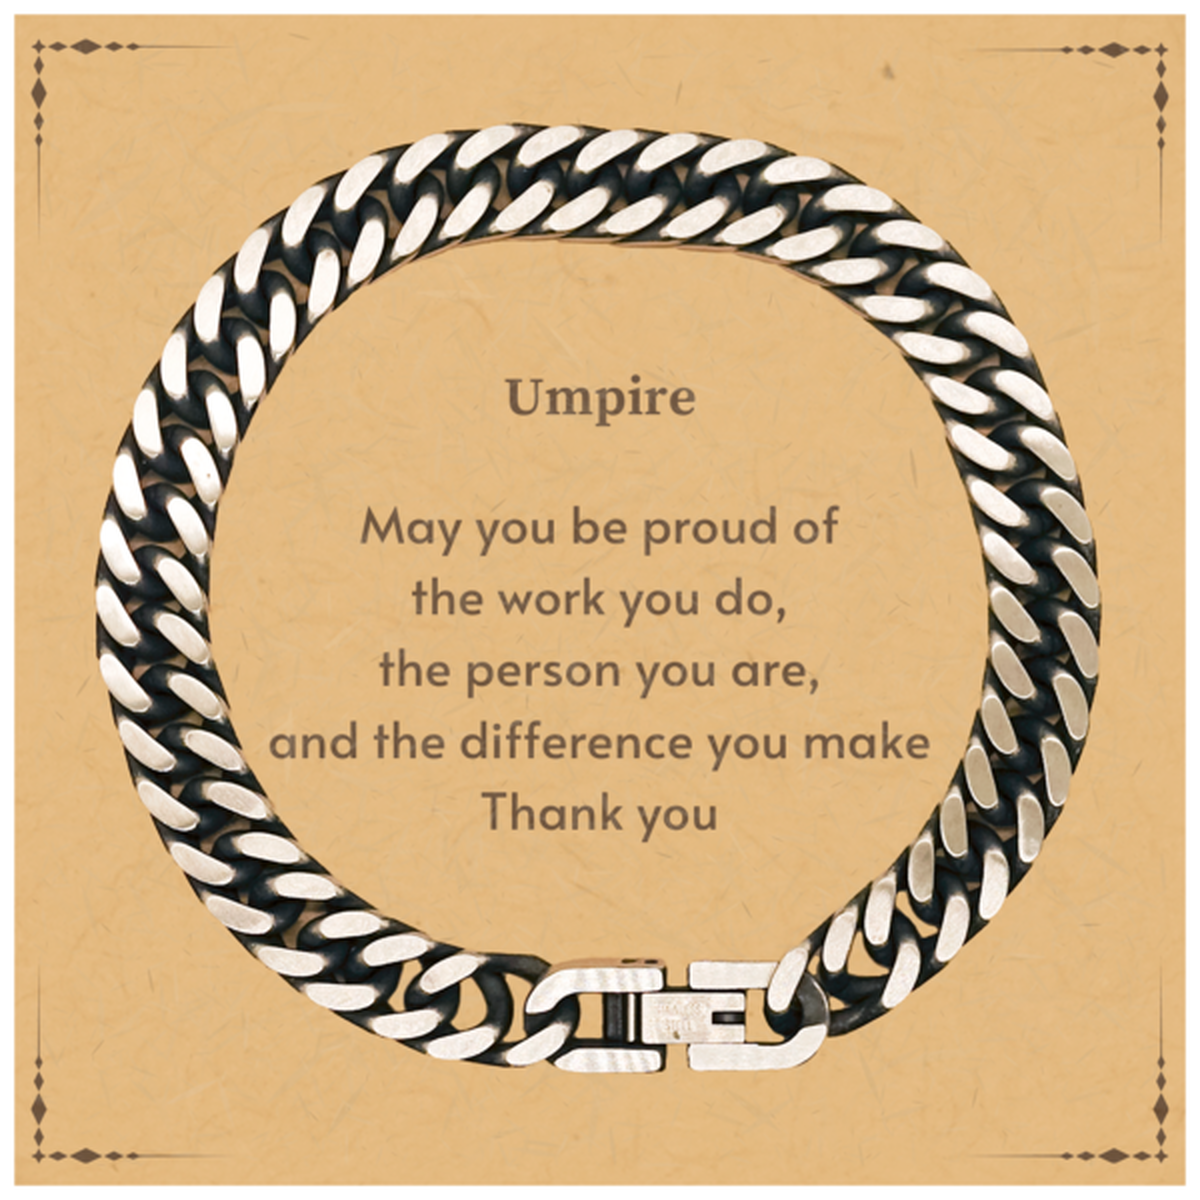 Heartwarming Cuban Link Chain Bracelet Retirement Coworkers Gifts for Umpire, Umpire May You be proud of the work you do, the person you are Gifts for Boss Men Women Friends